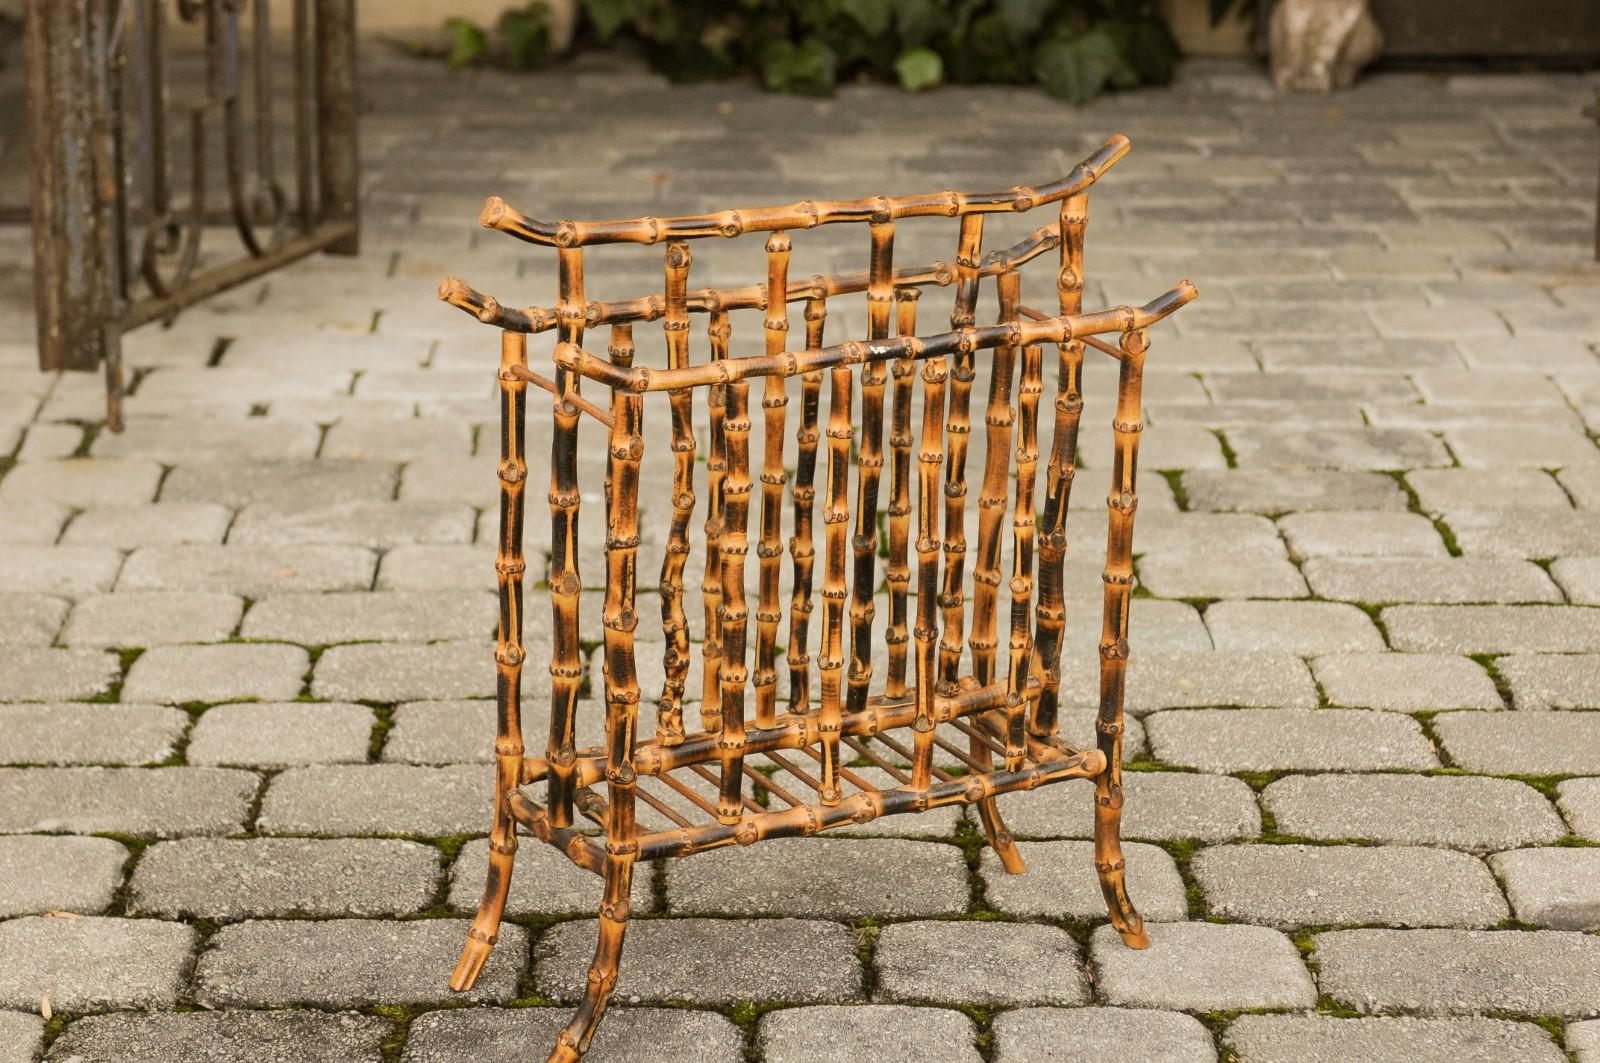 A vintage English mottled bamboo magazine rack from the mid-20th century, with chinoiserie influence. Born in England during the midcentury period, this bamboo magazine rack presents a stylish Silhouette, showing an undeniable chinoiserie